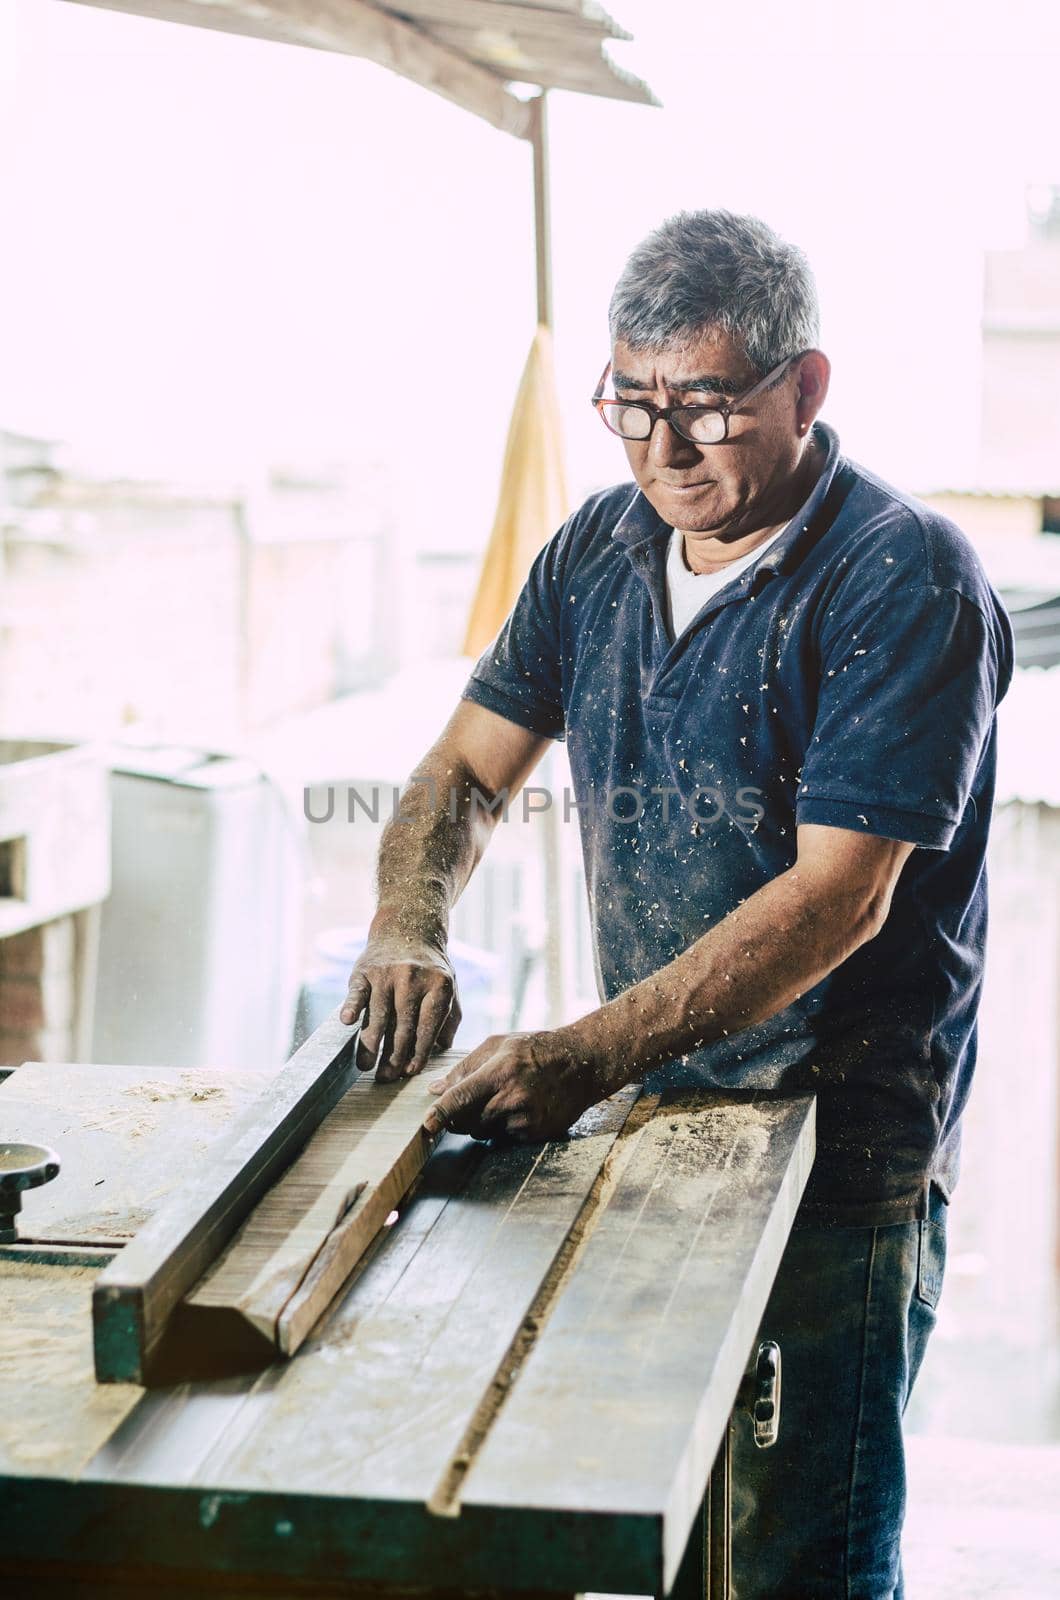 Professional carpenter cutting wooden board at his workshop